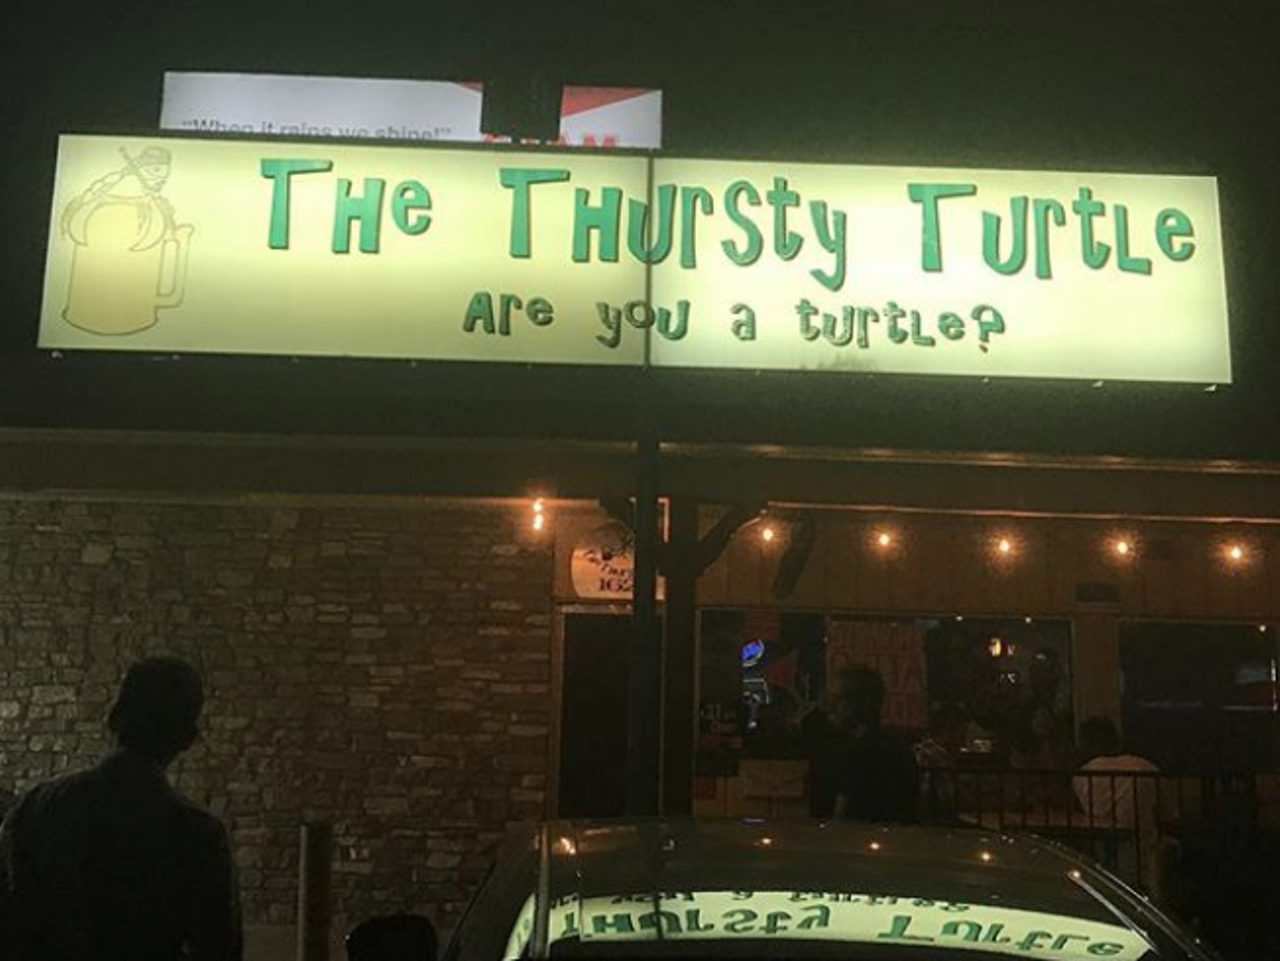 The Thursty Turtle
1626 NE Interstate 410 Loop, (210) 820-3600, facebook.com/TheThurstyTurtle
Right off the Loop 410 access road you’ll find this dingy (we say it with love) dive bar connected to a convenience store. While the folks you graduated with flock to more poppin’ spots, you and your selected company will be safe drinking it up here. Take the strong drinks and laid-back vibes as the cherry on top for what will be a drama-free outing.
Photo via Instagram / jonwiener